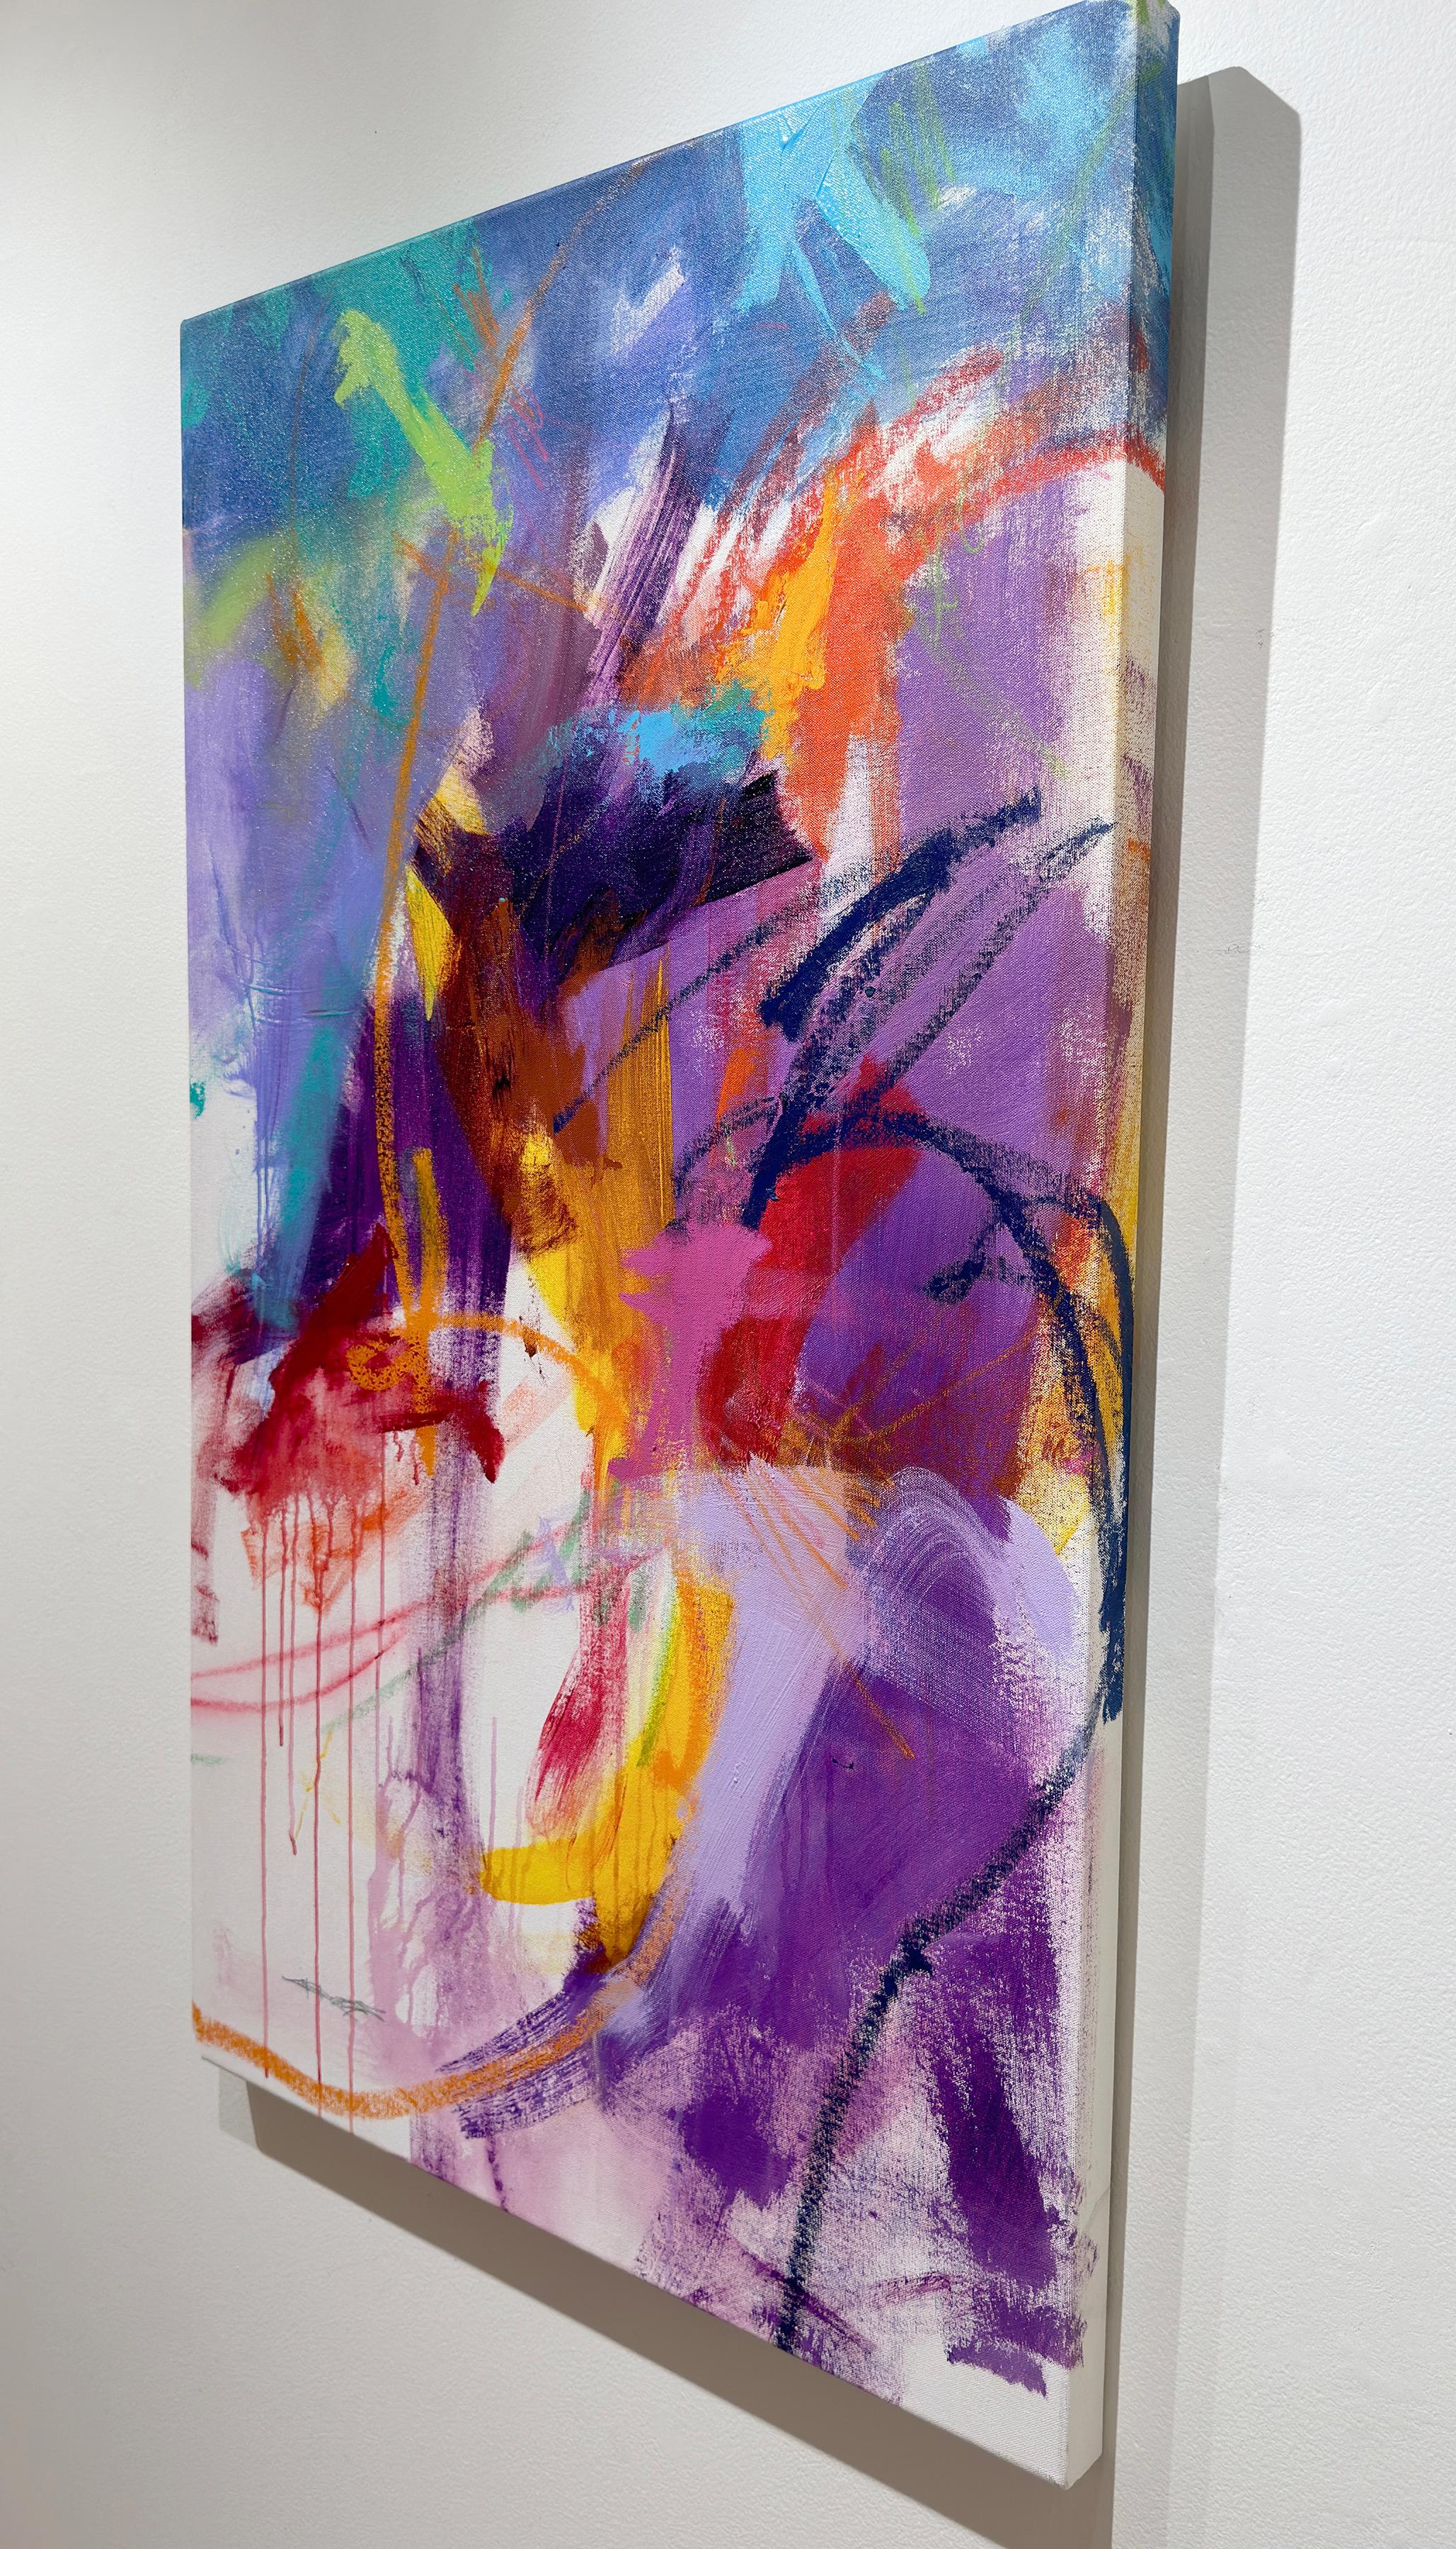 This colorful abstract painting, 